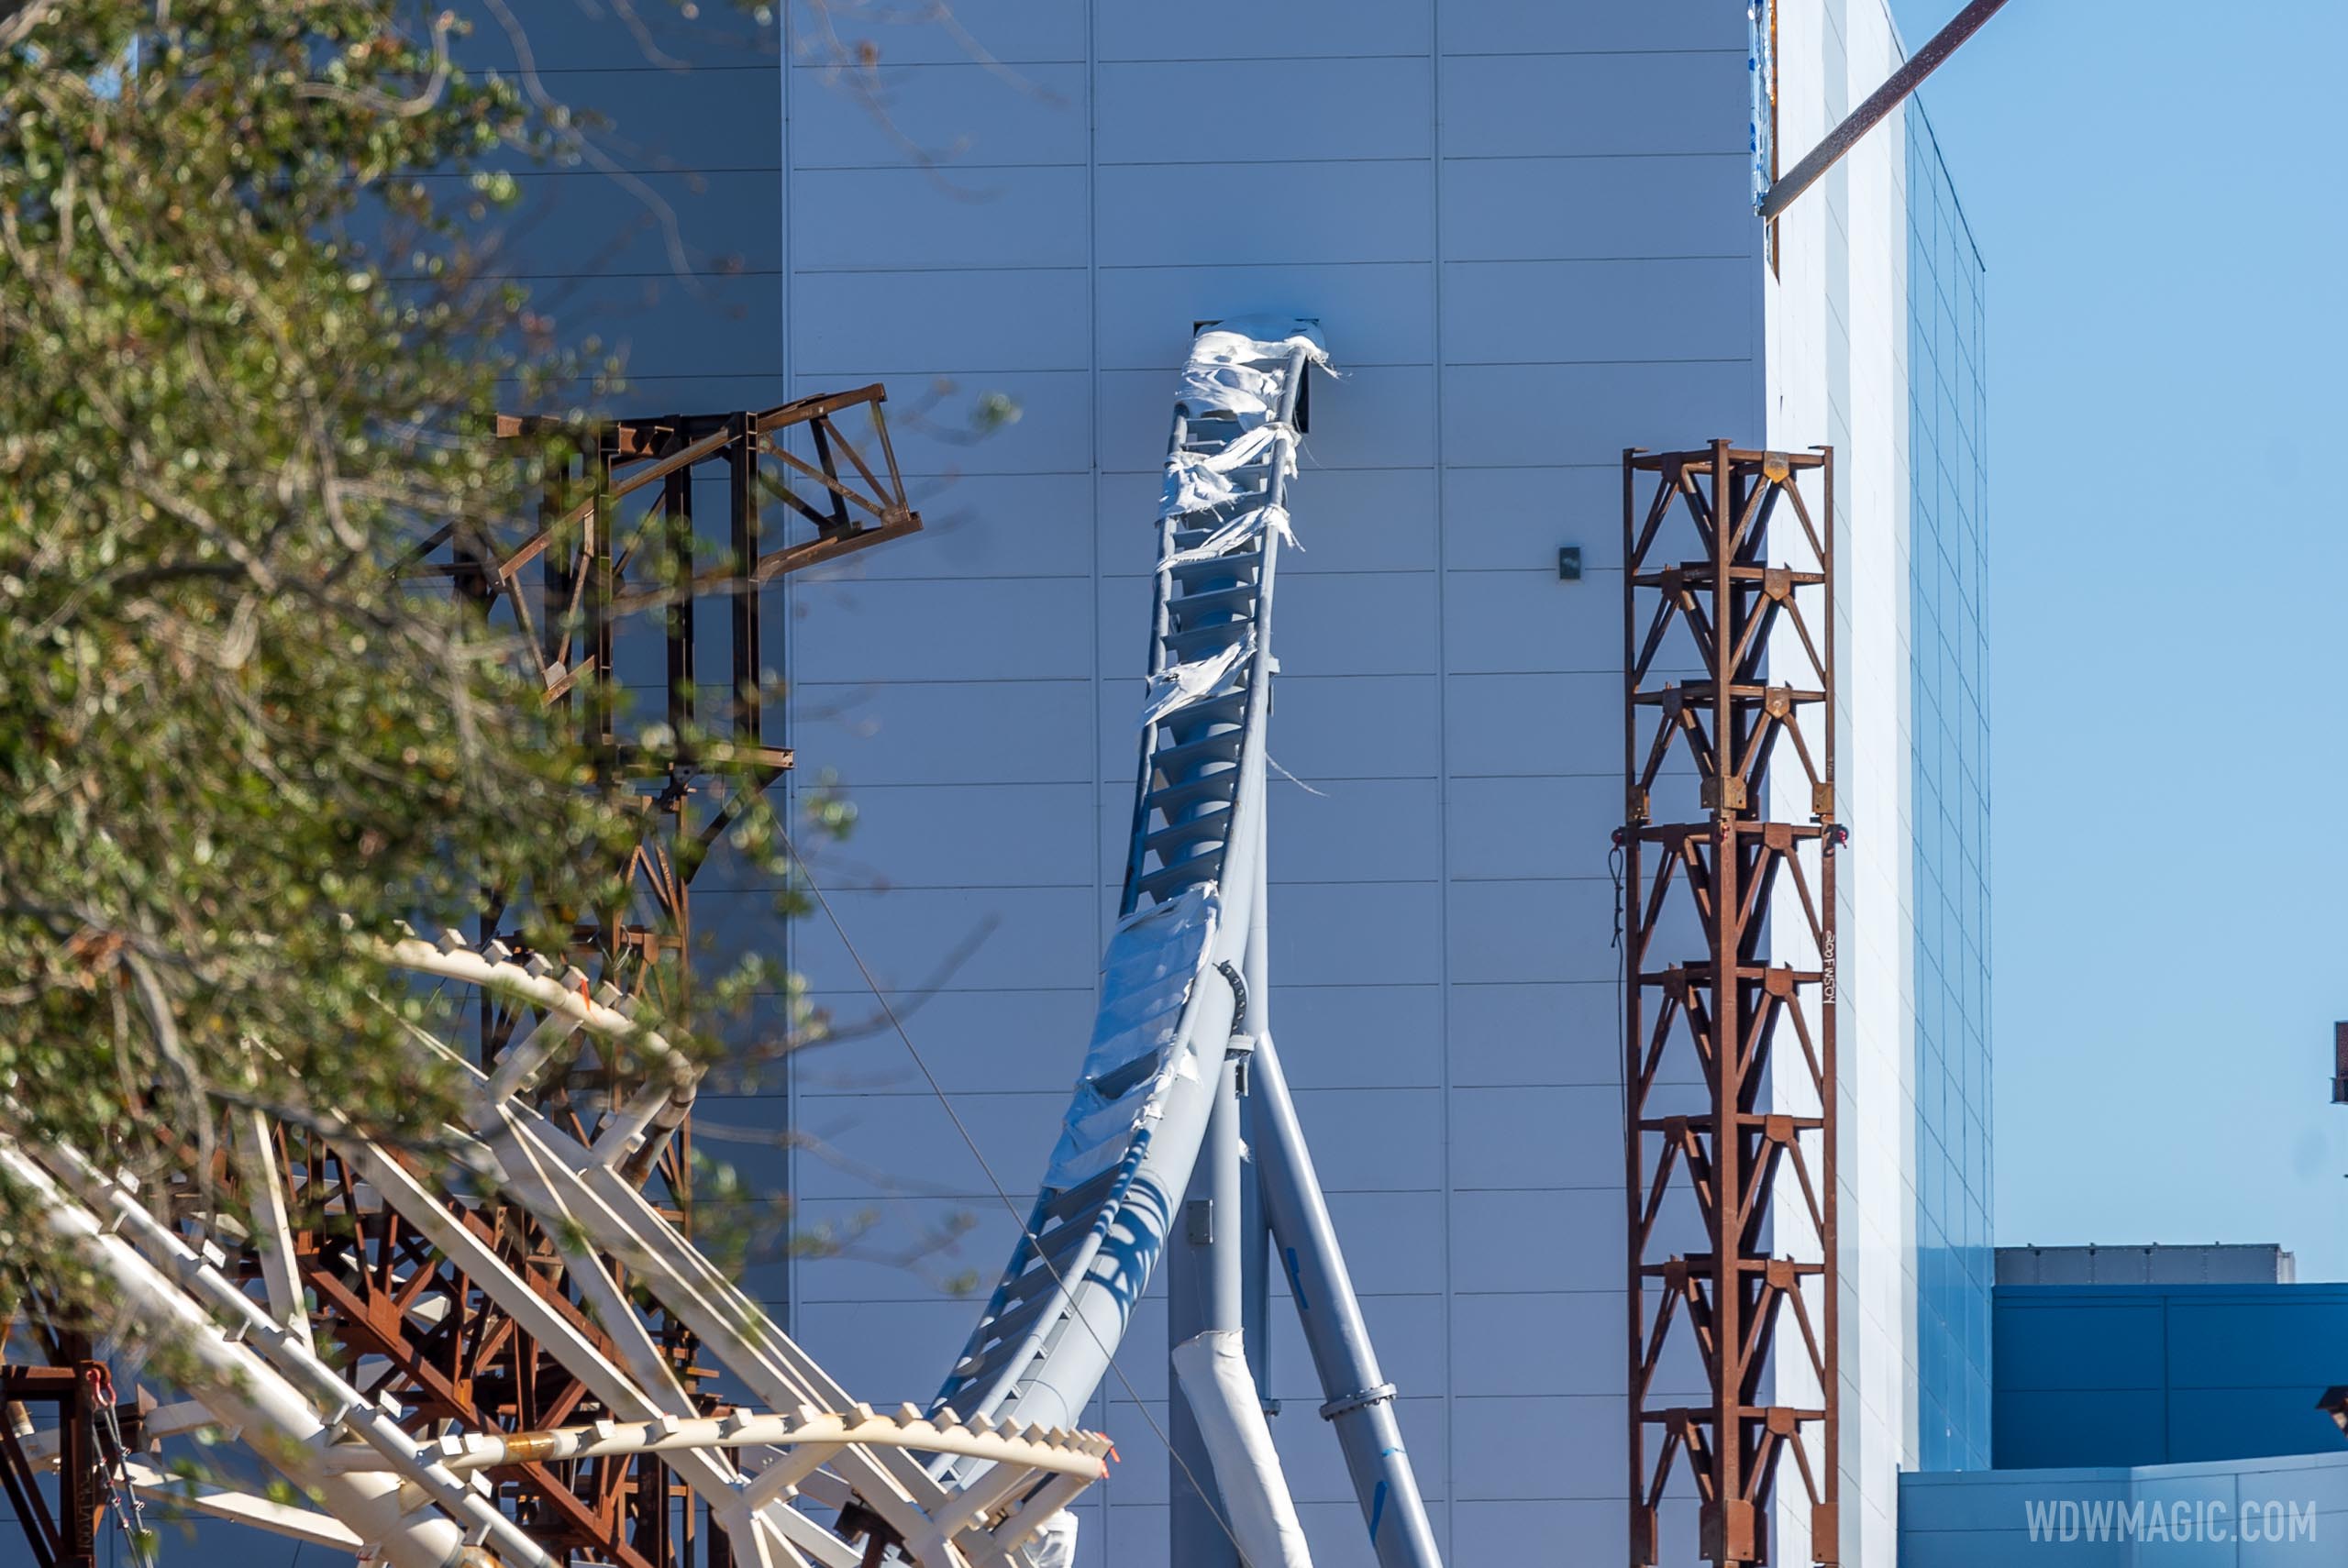 Latest look at TRON Lightcycle Run construction at the Magic Kingdom